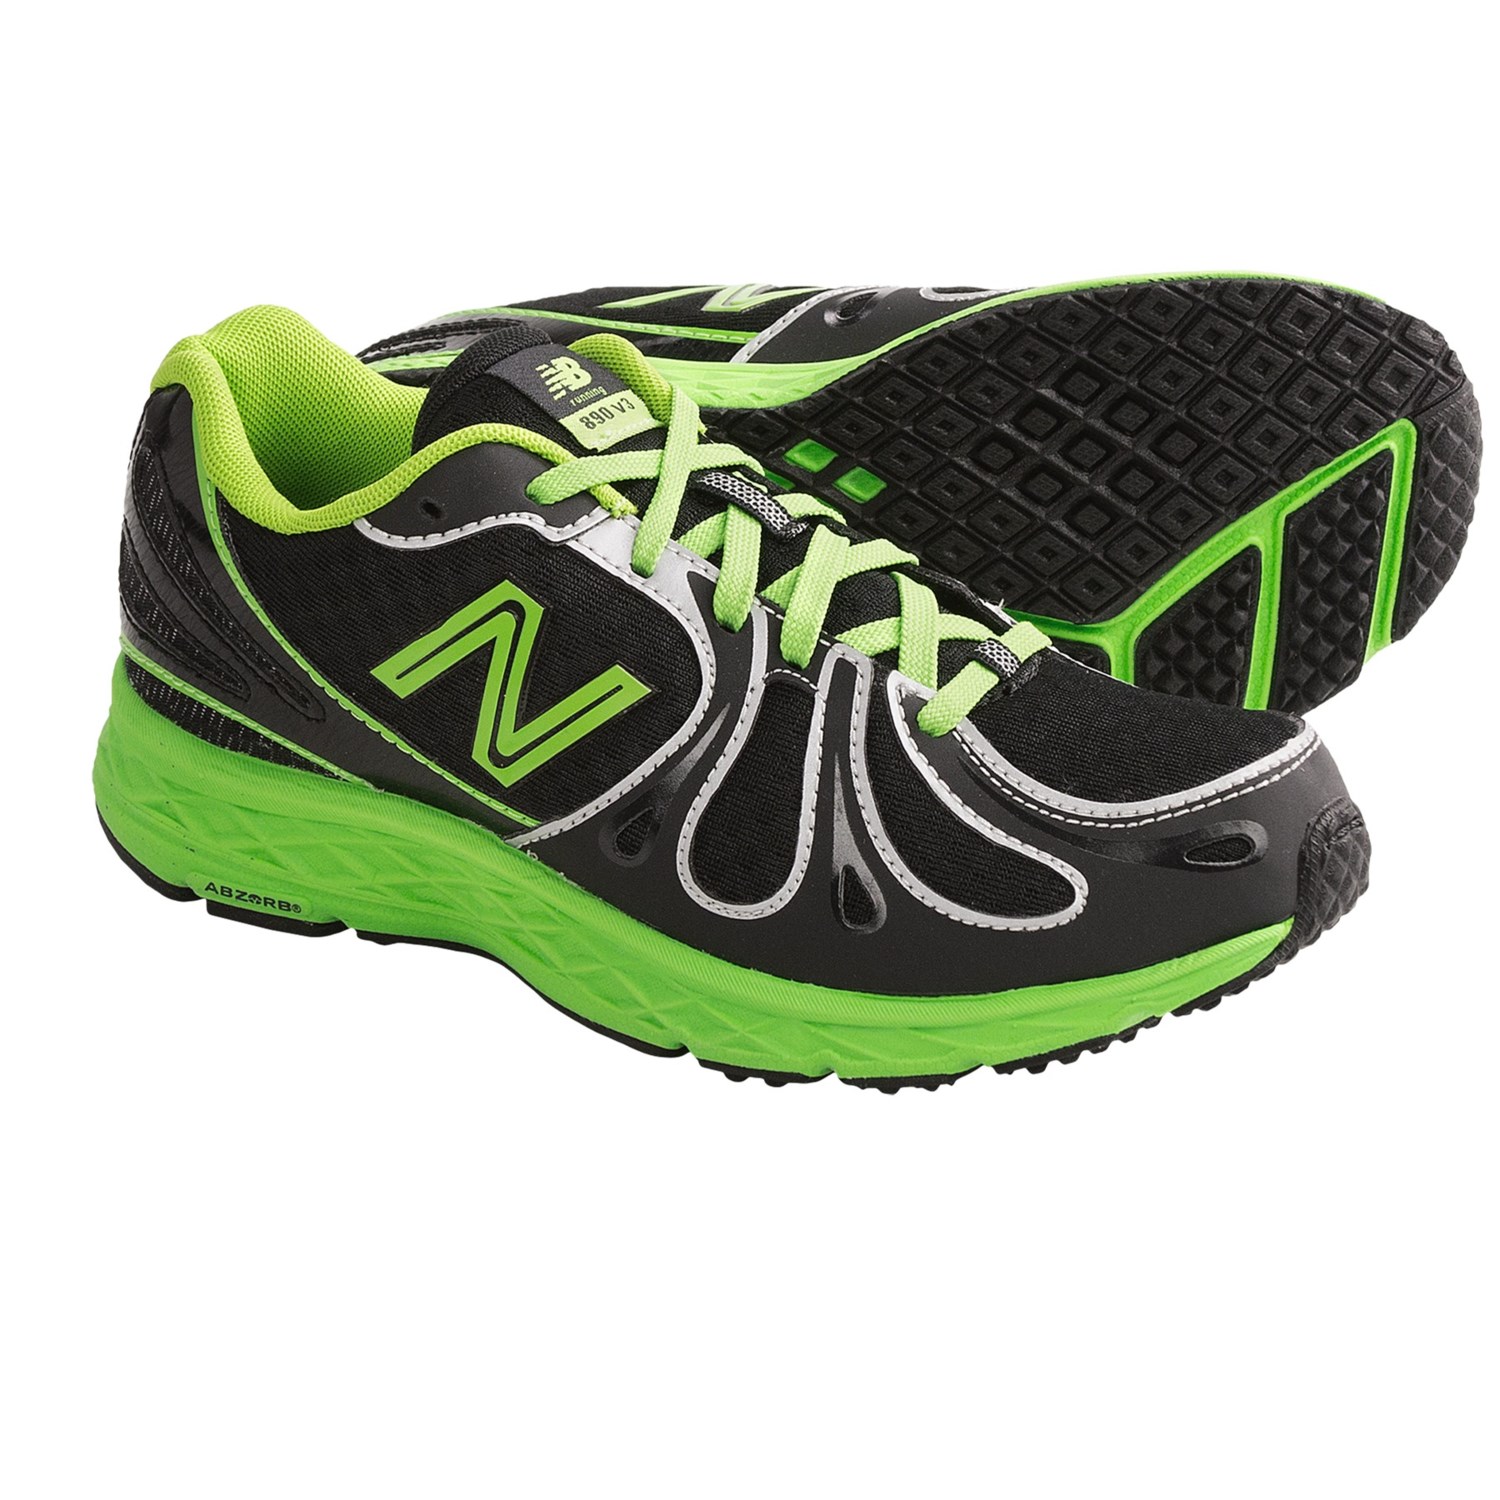 New Balance KJ890 Running Shoes (For Big Boys and Girls) 56